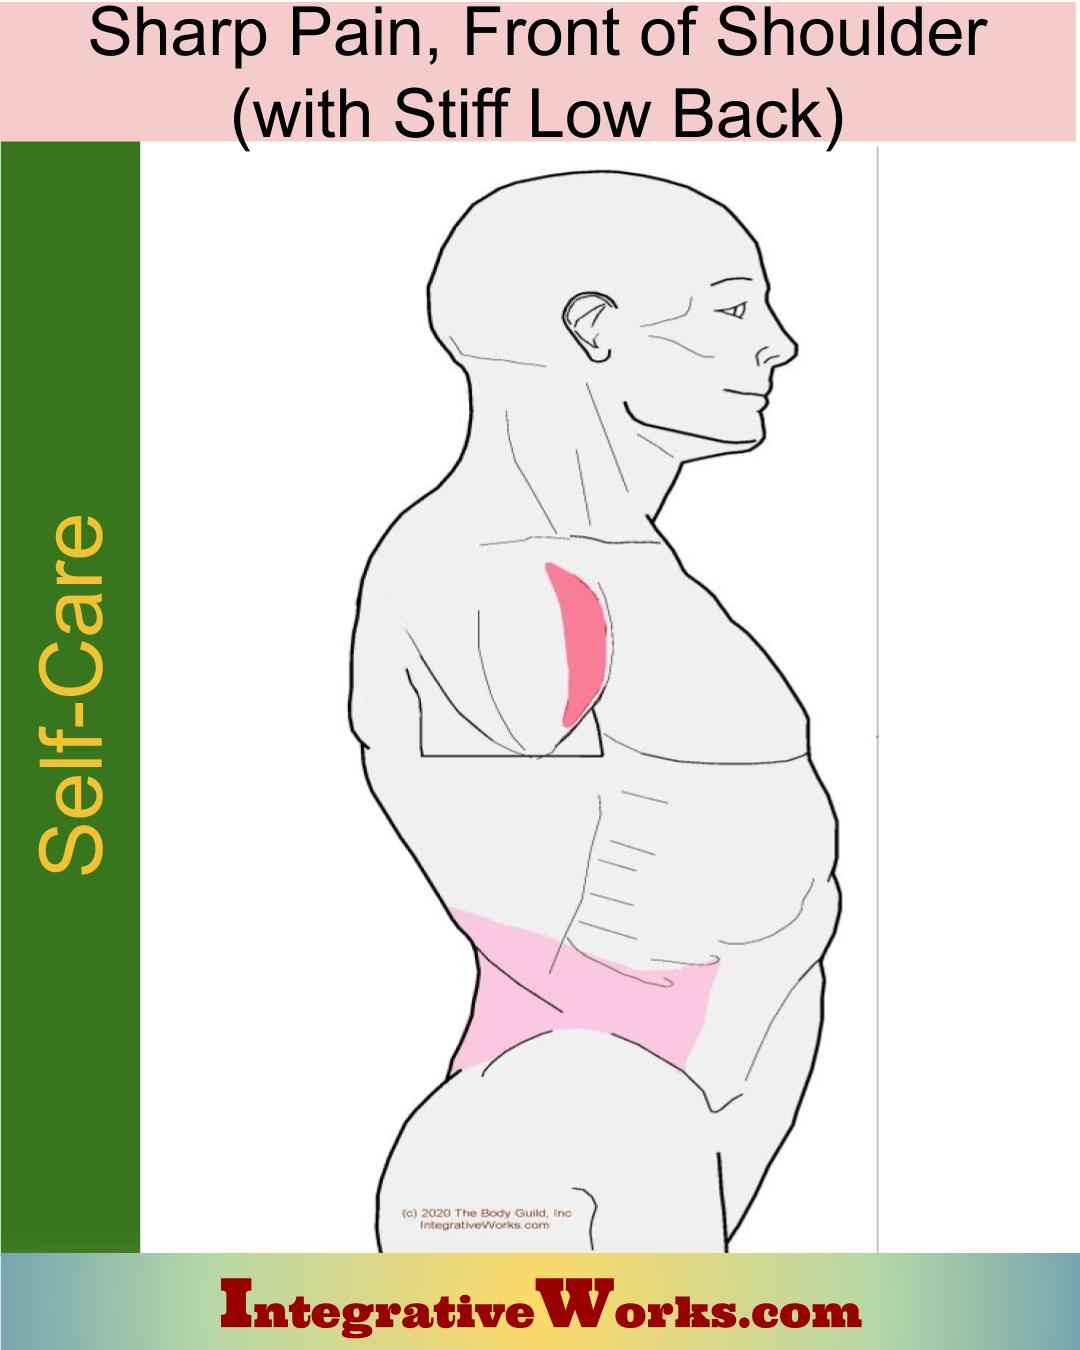 Self Care – Sharp Pain in Front of Shoulder, Tight Low Back